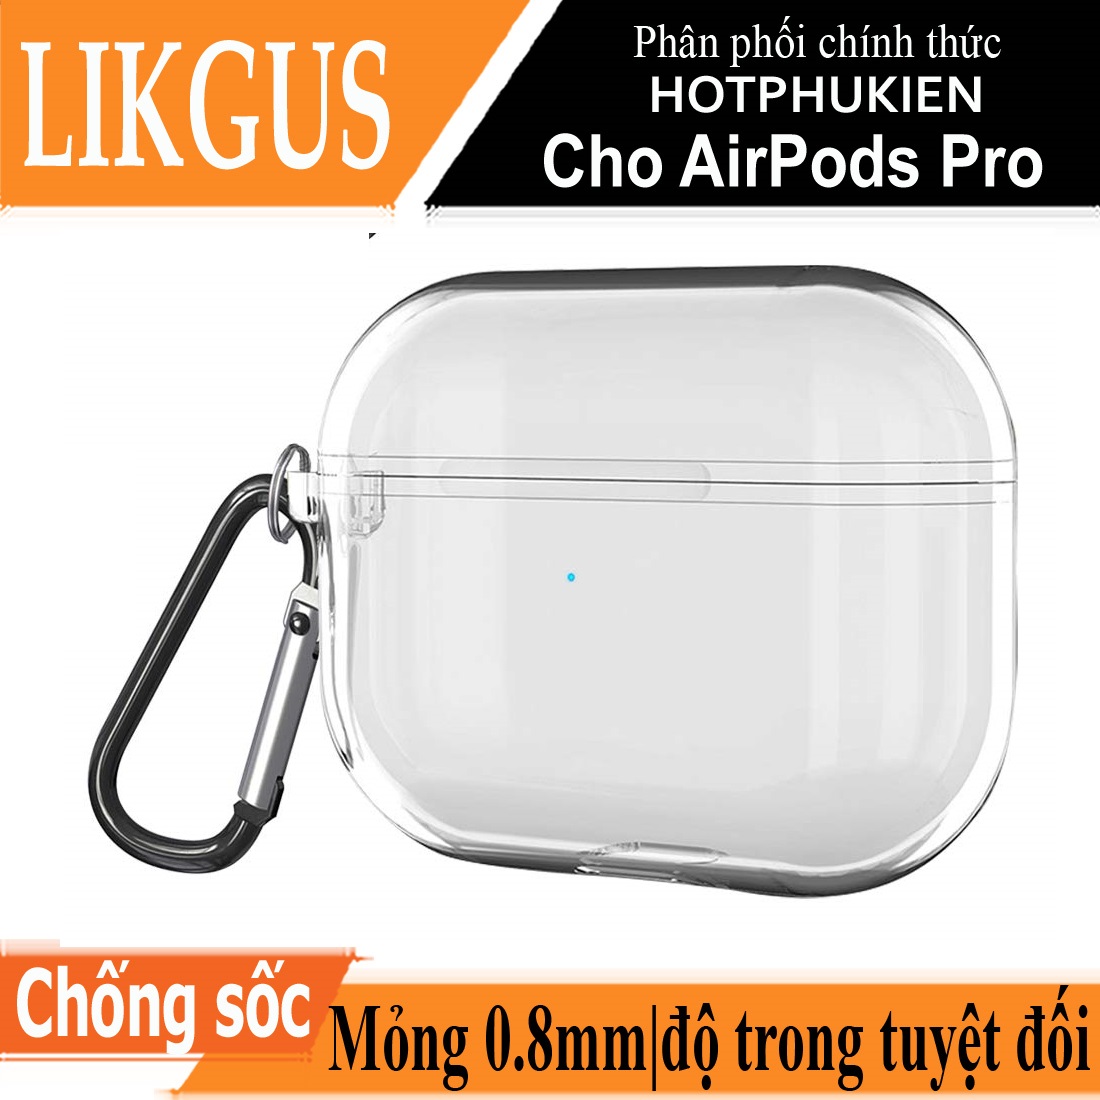 Bao case chống sốc trong suốt cho Airpods Pro hiệu Likgus Crystal Shell